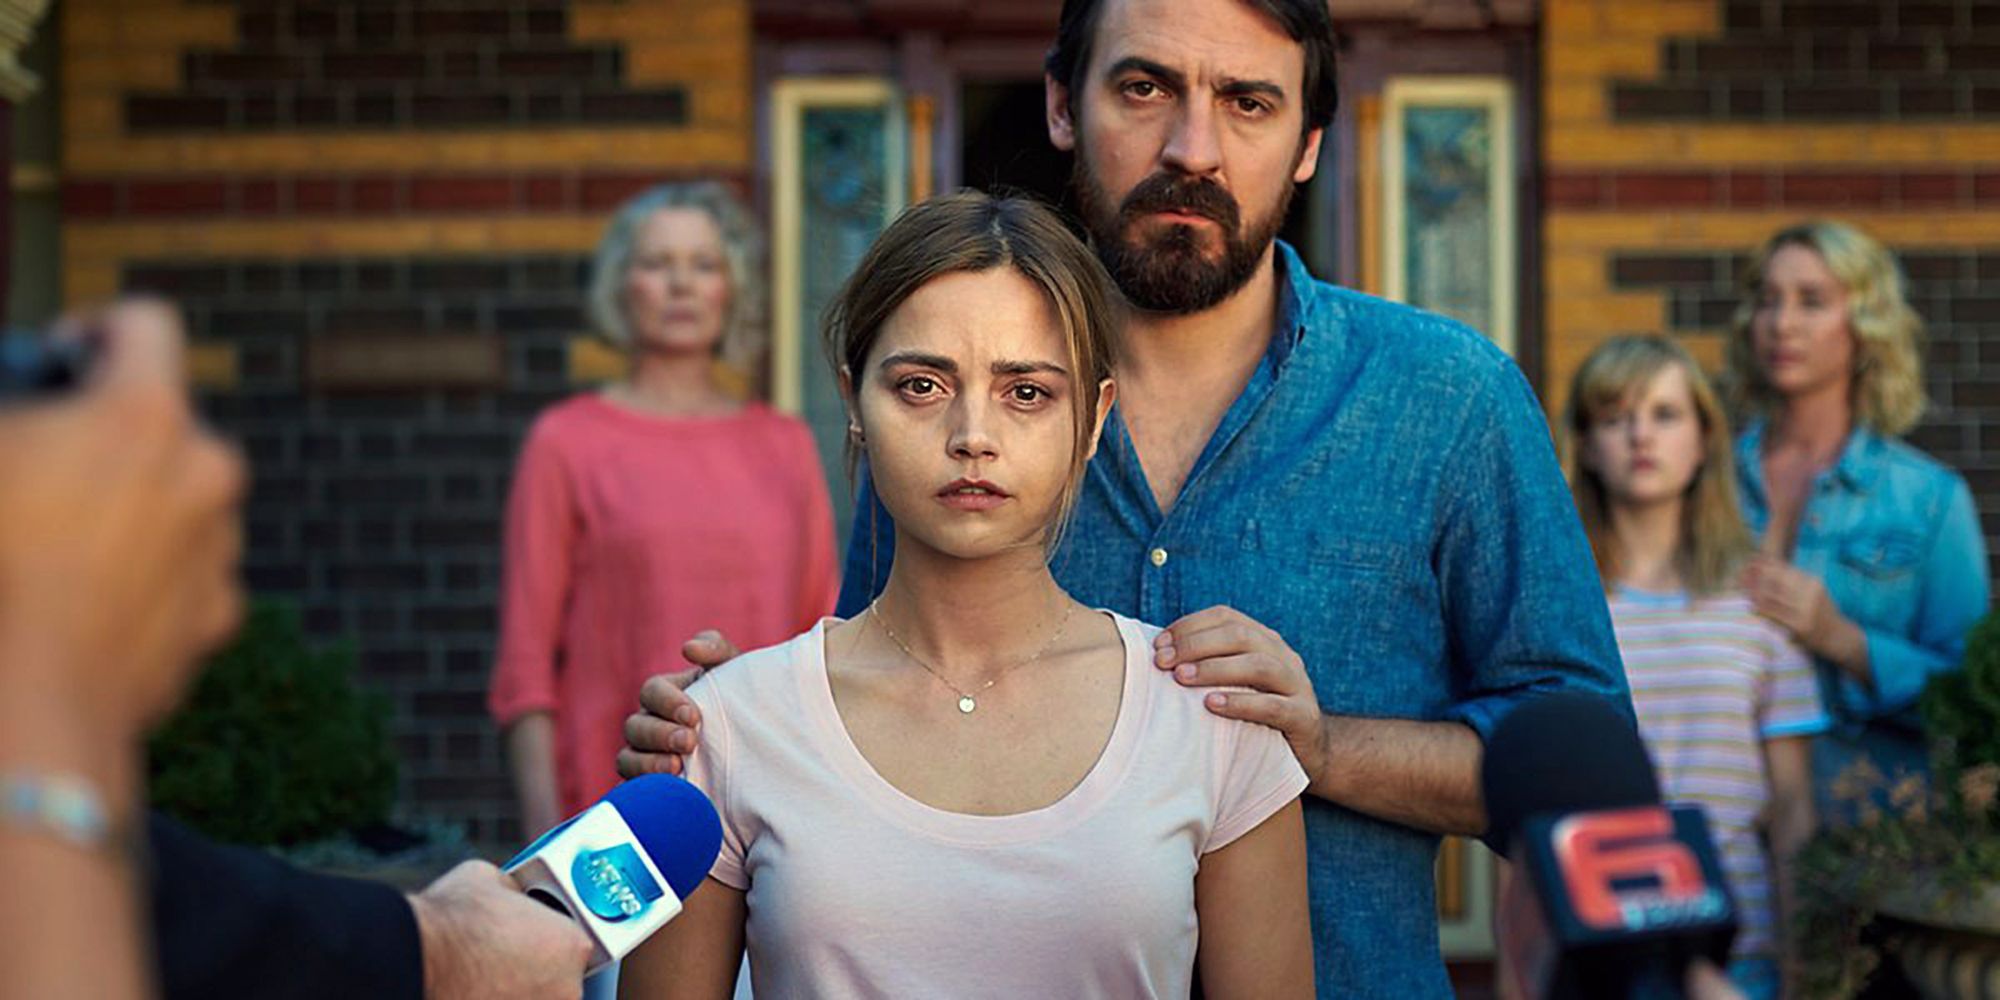 In 'The Cry', starring Jenna Coleman and Ewen Leslie, nothing is what it seems